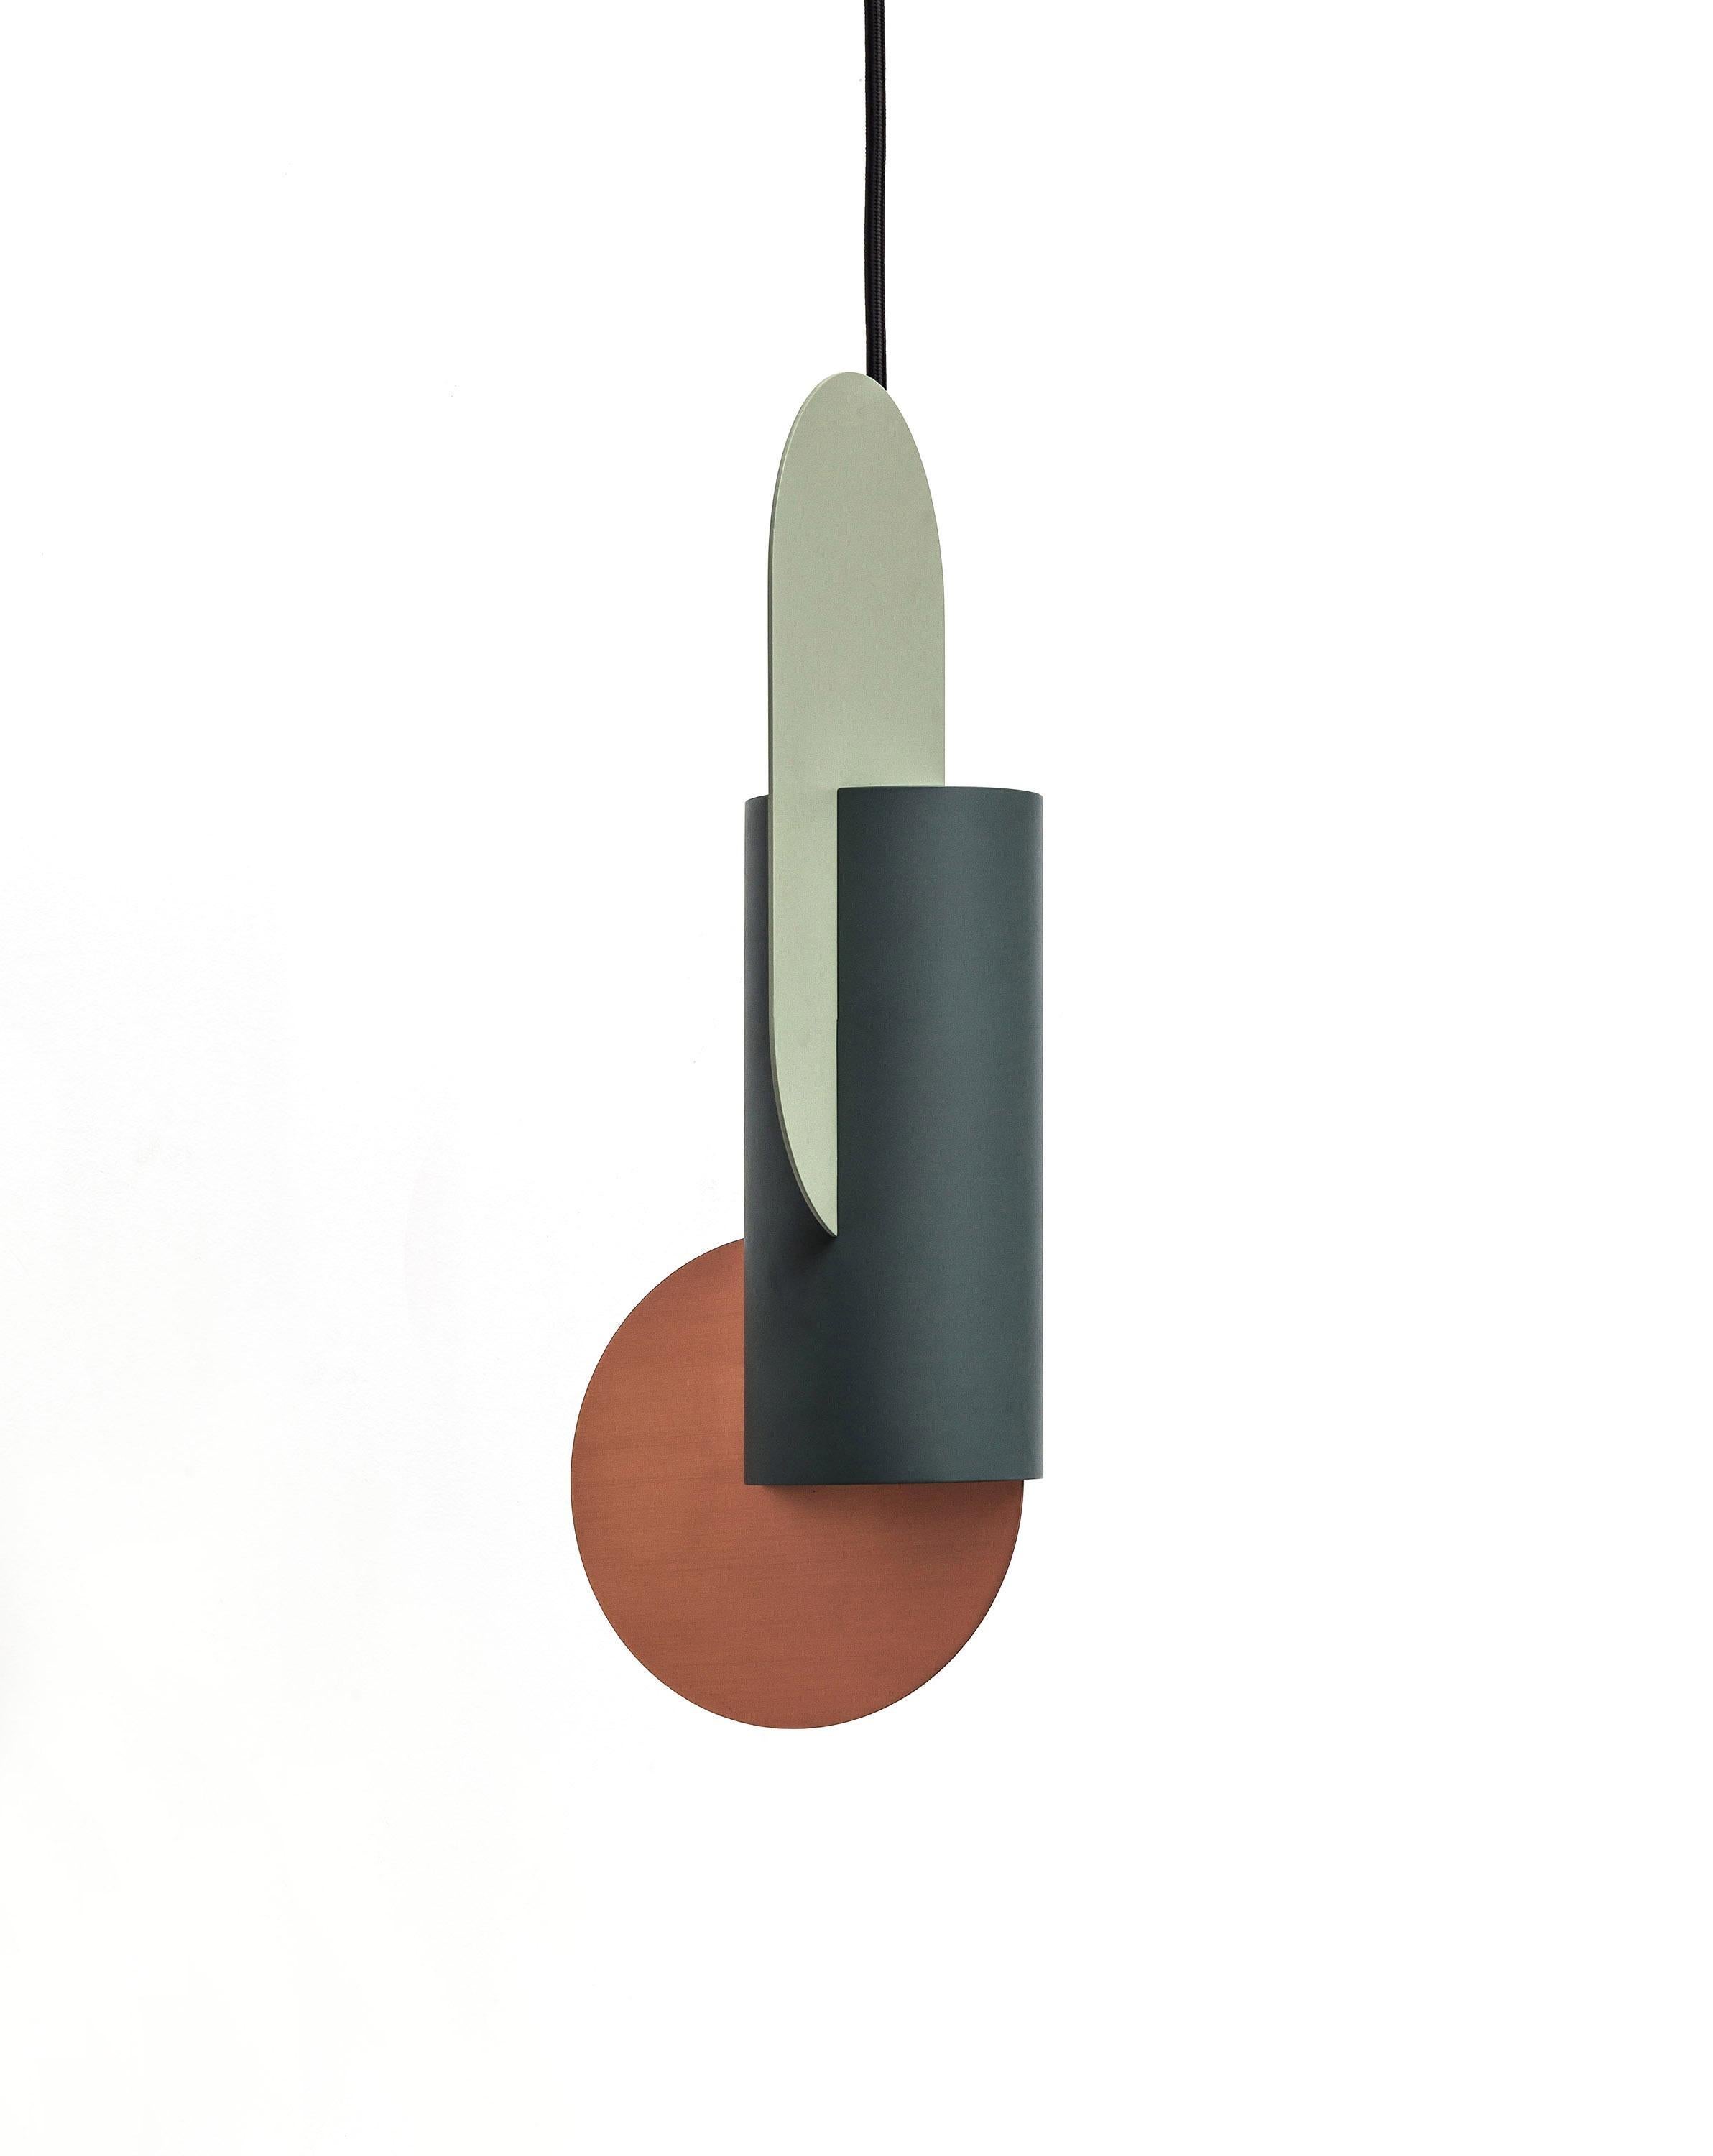 Ukrainian Set of Three 'Suprematic' Pendant Lamps by NOOM, CS1 Finishes For Sale